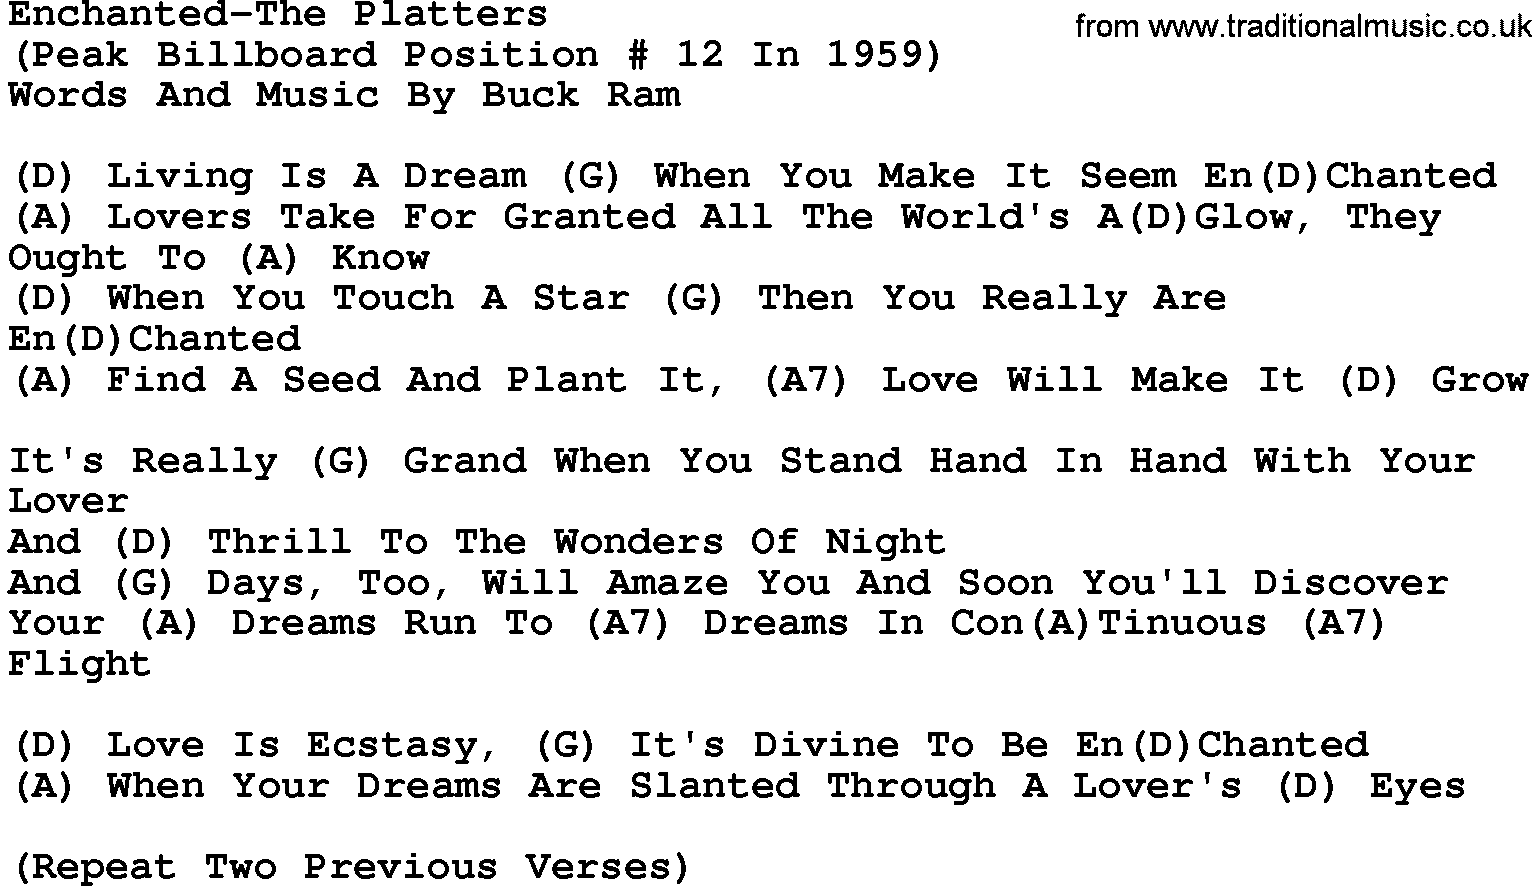 Country music song: Enchanted-The Platters lyrics and chords